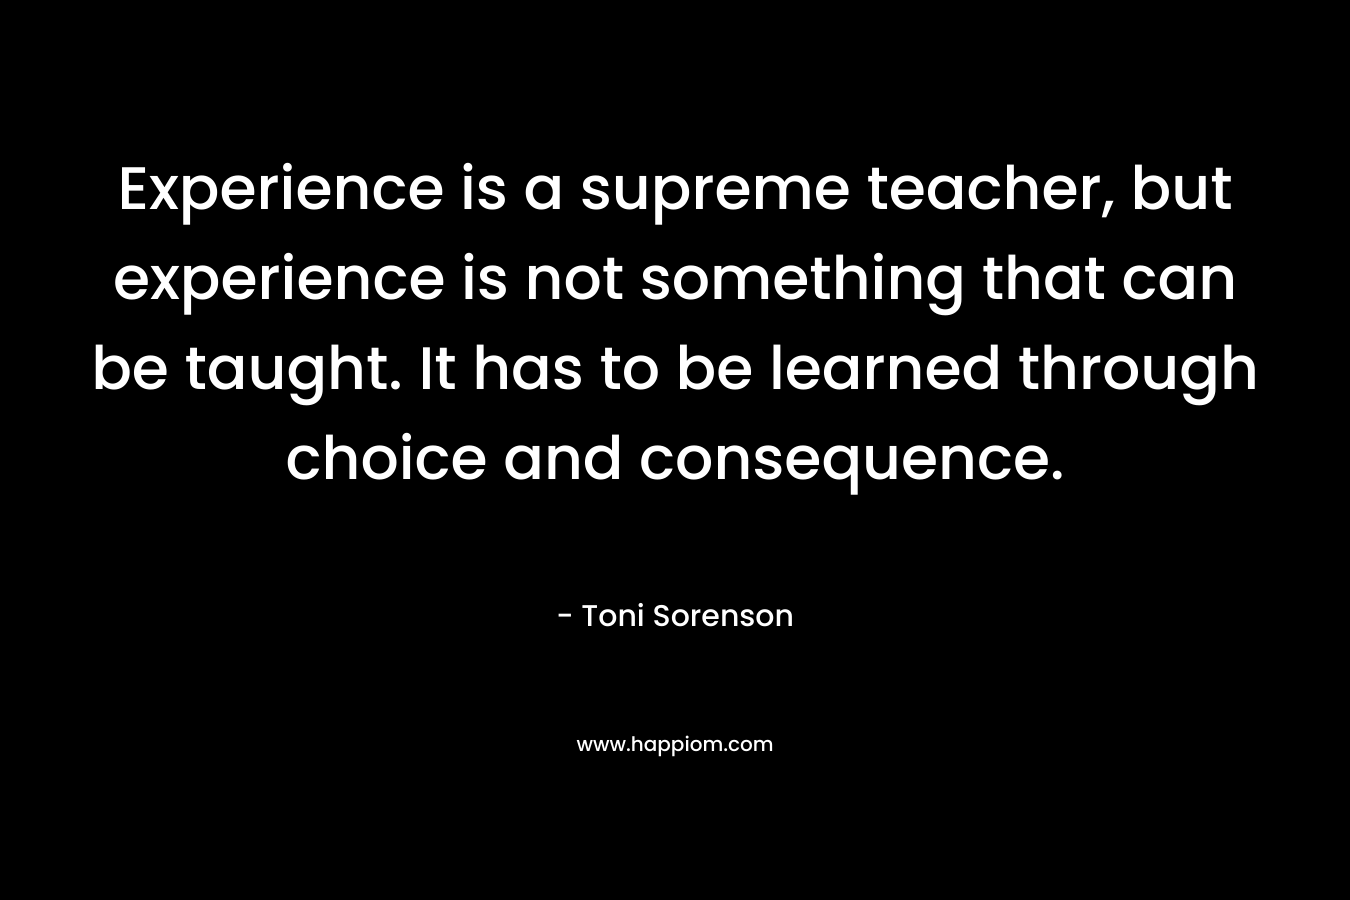 Experience is a supreme teacher, but experience is not something that can be taught. It has to be learned through choice and consequence. – Toni Sorenson